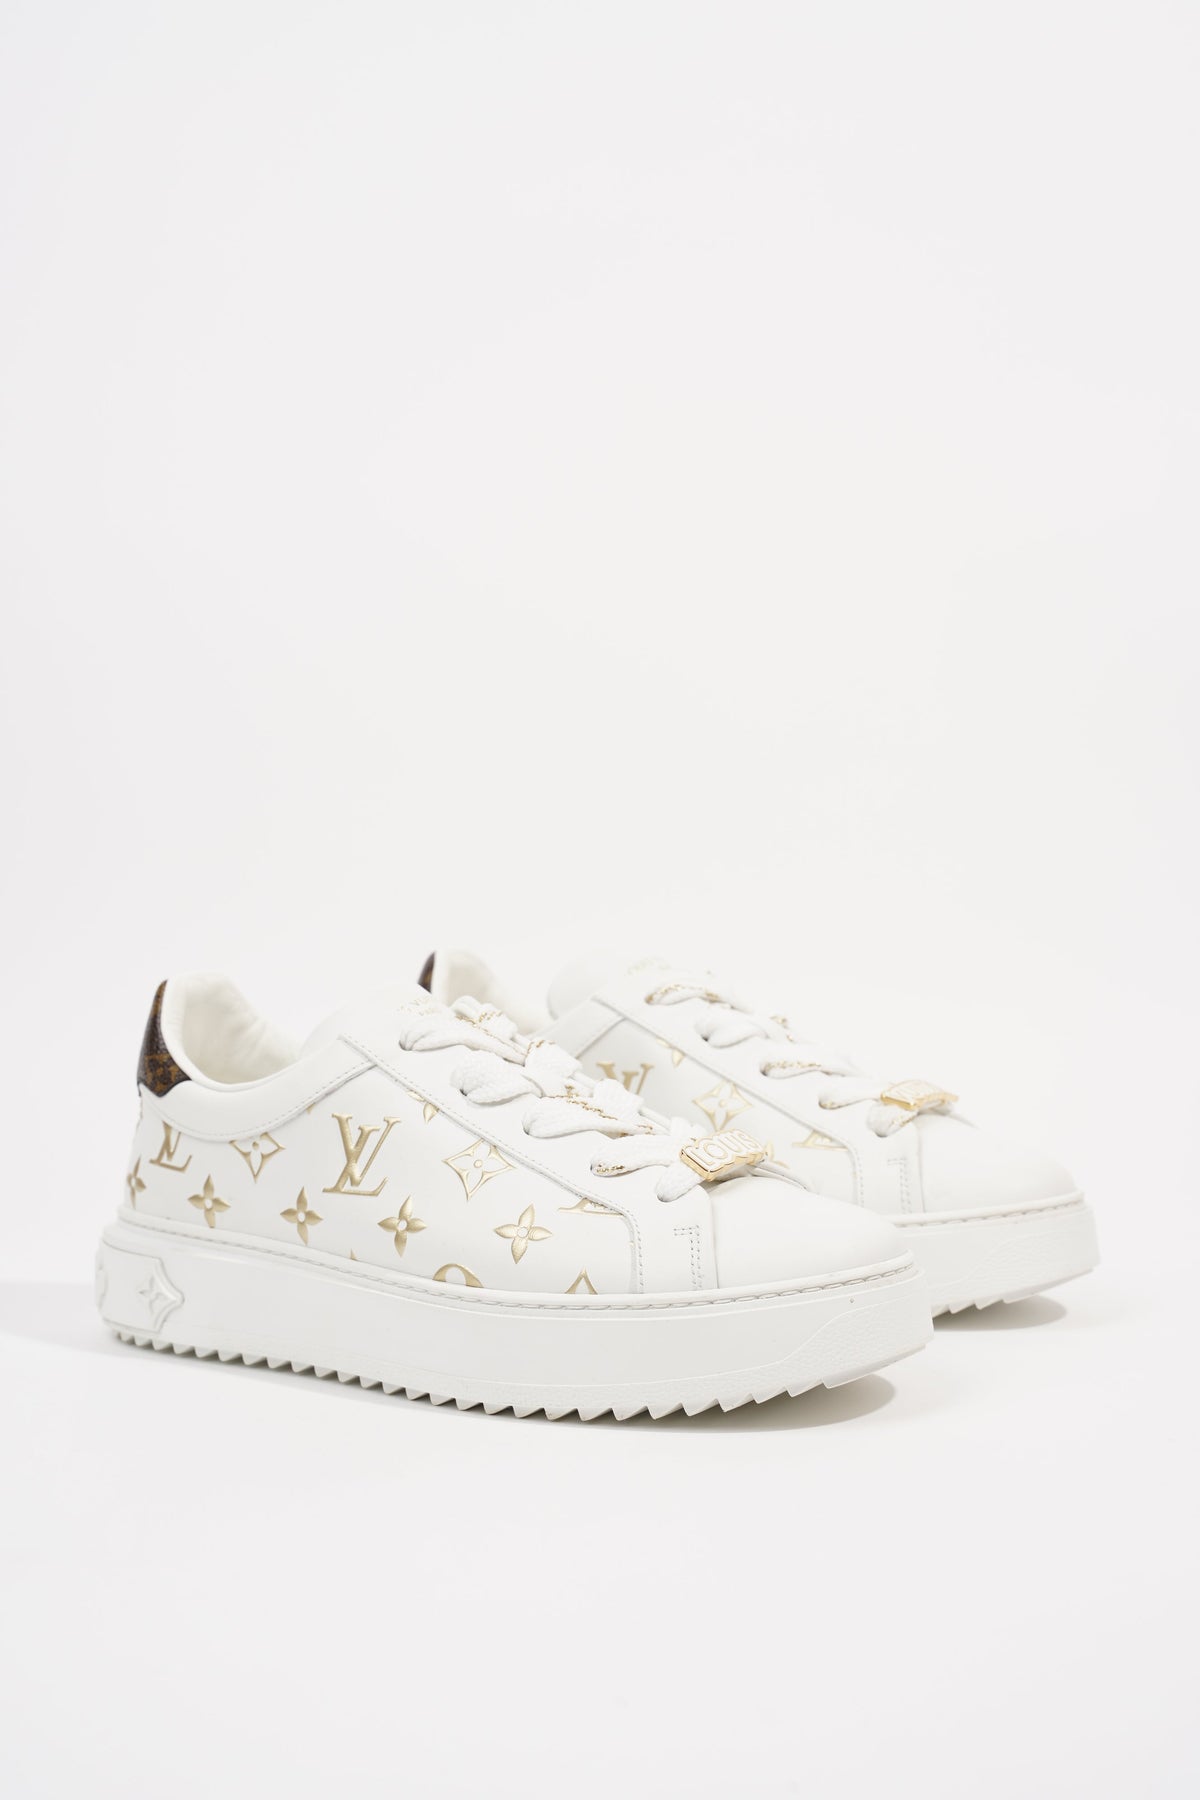 LOUIS VUITTON Time Out Sneaker Gold. Size 34